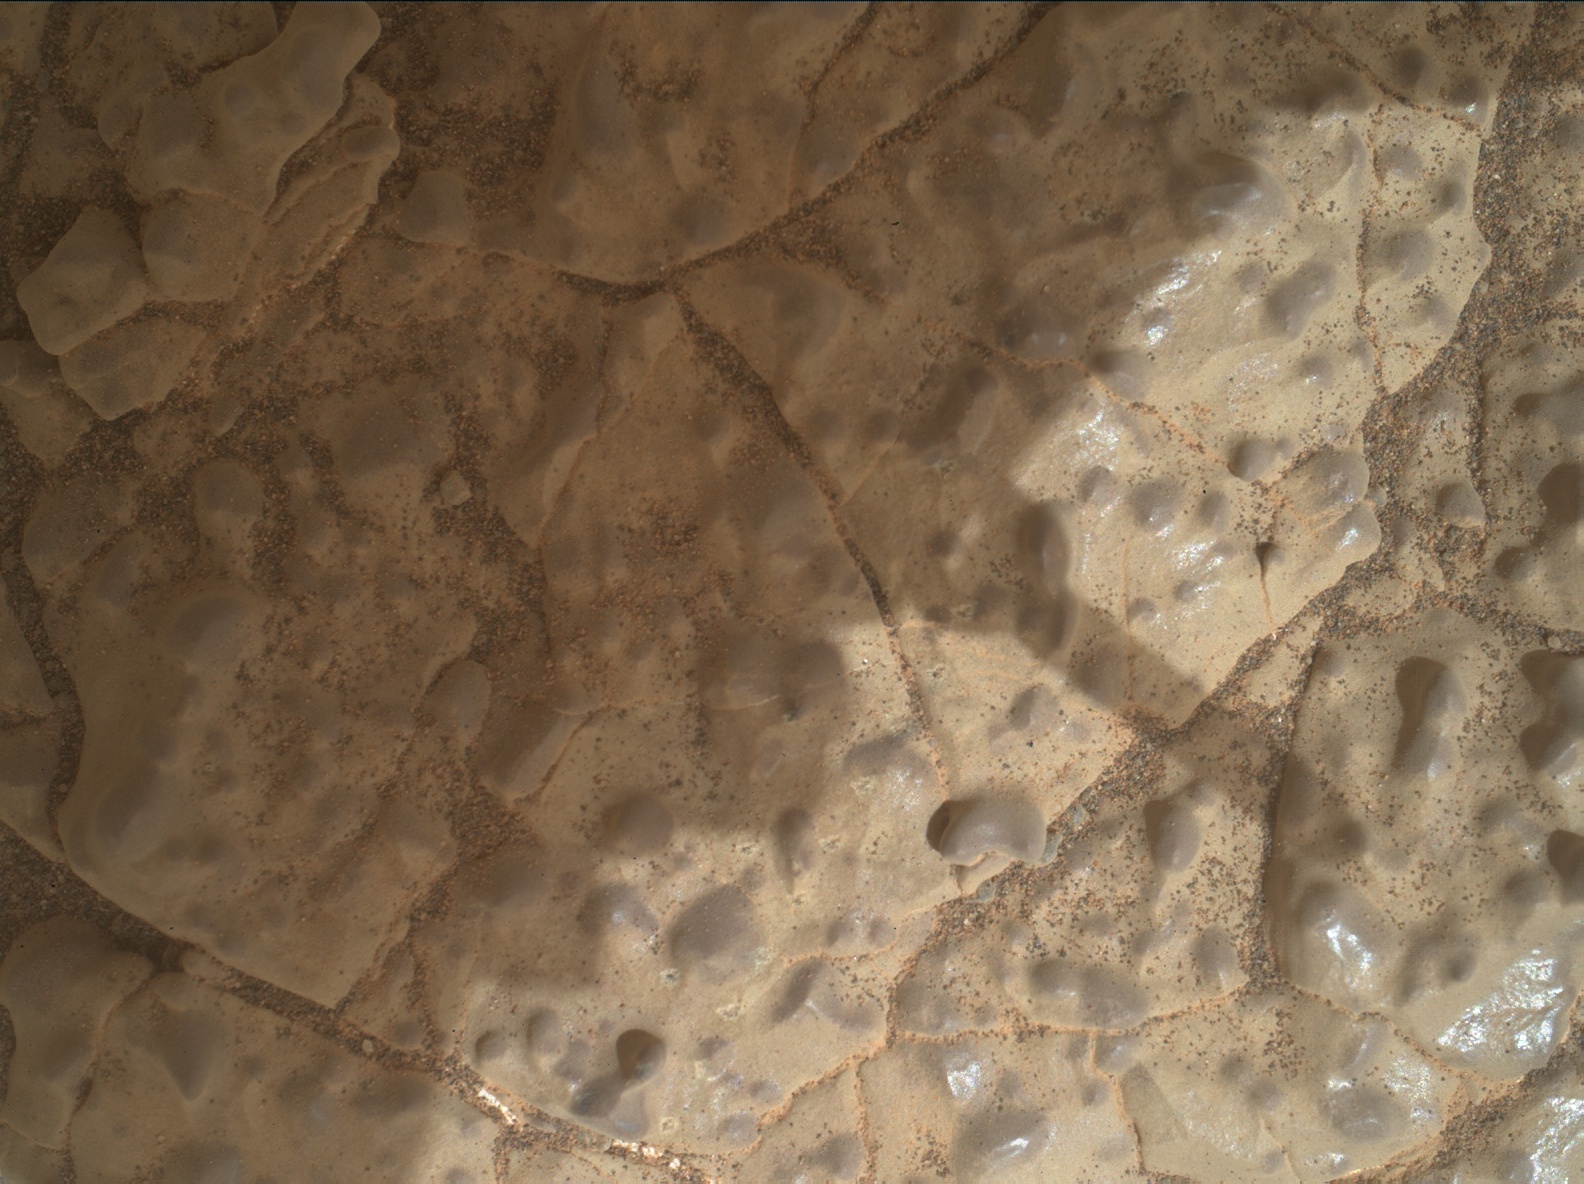 Nasa's Mars rover Curiosity acquired this image using its Mars Hand Lens Imager (MAHLI) on Sol 2965